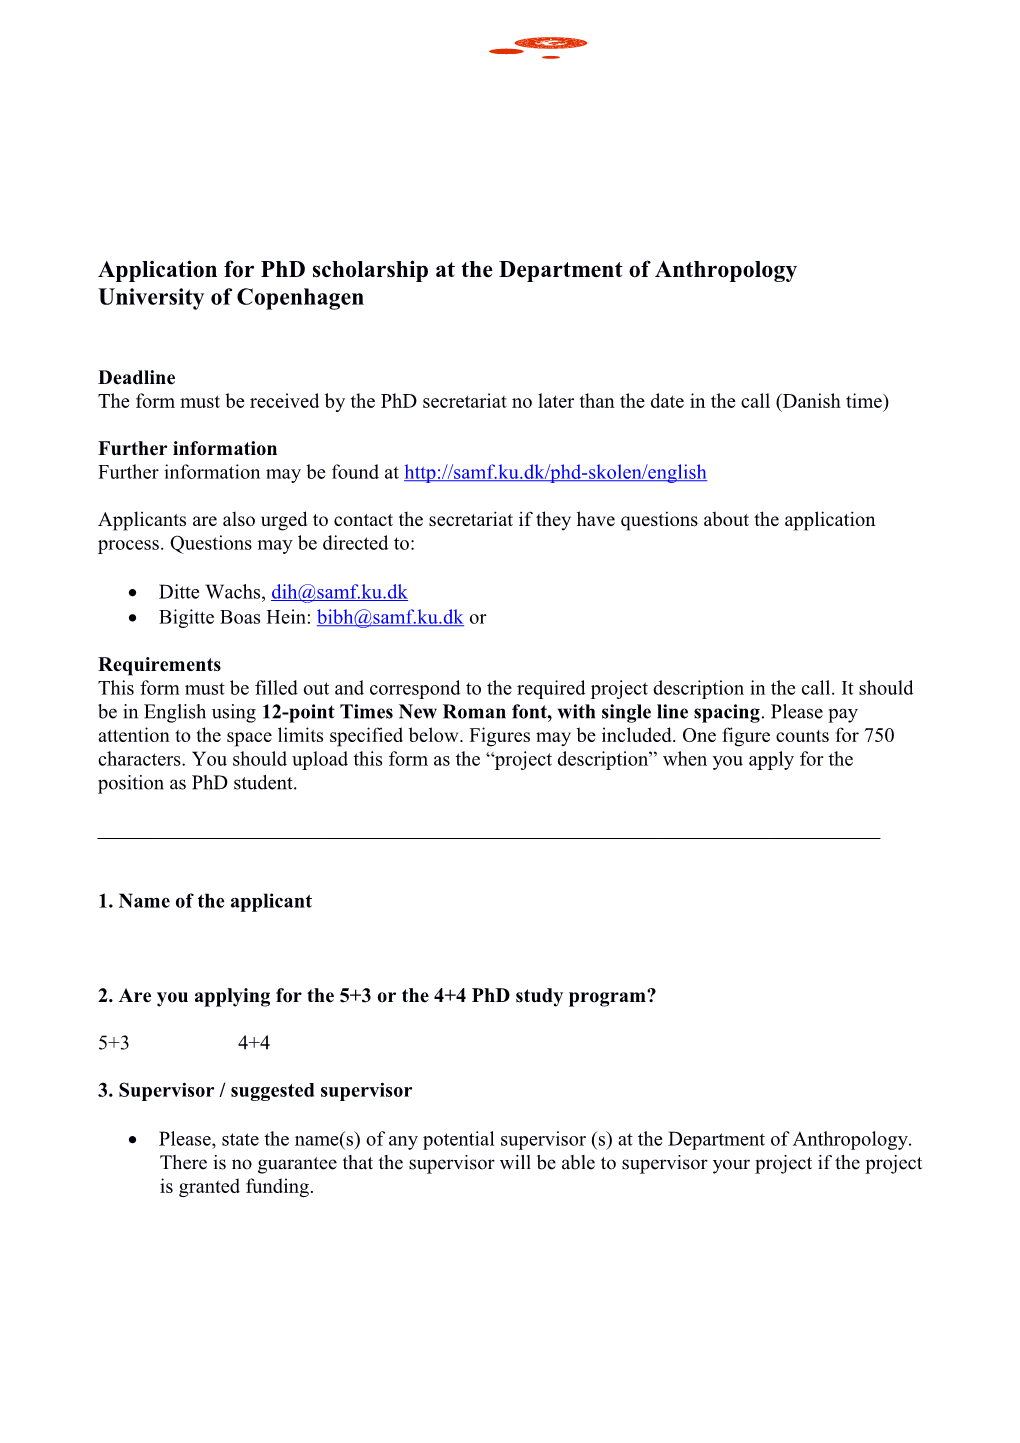 Application for Phd Scholarship at the Department of Anthropology